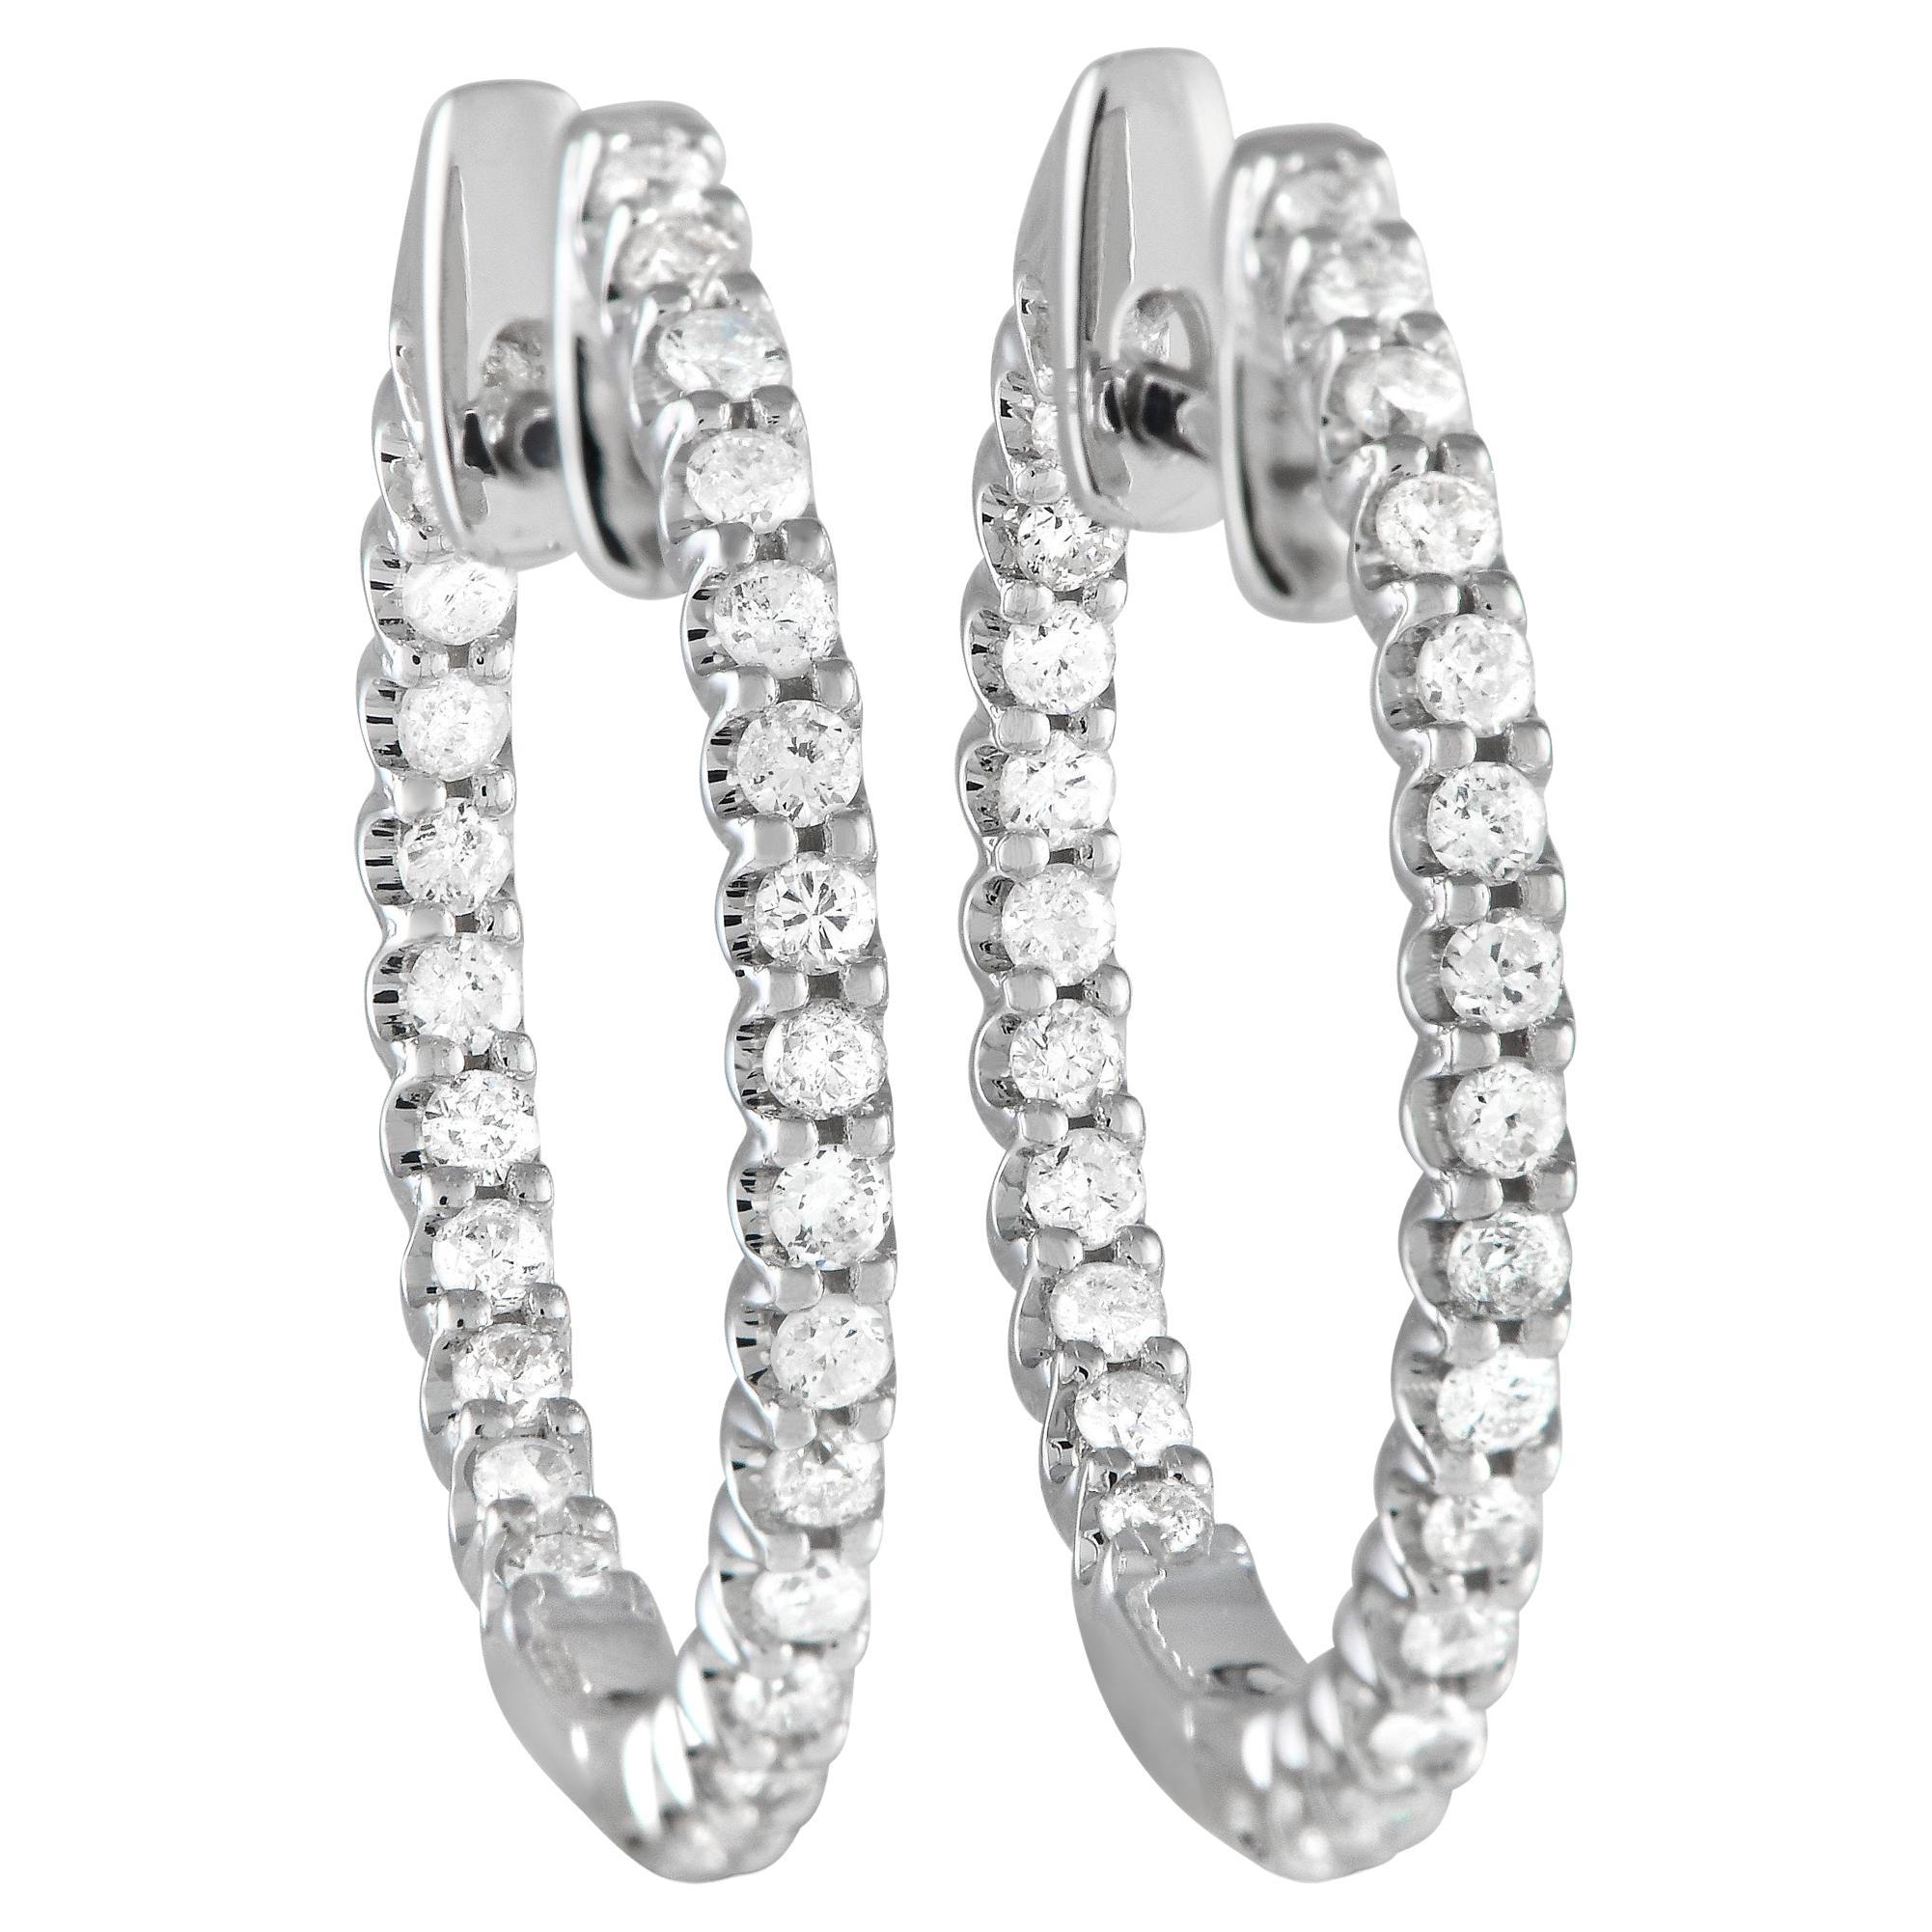 Lb Exclusive 14k White Gold 0.42 Carat Diamond Inside-Out Hoop Earrings For Sale